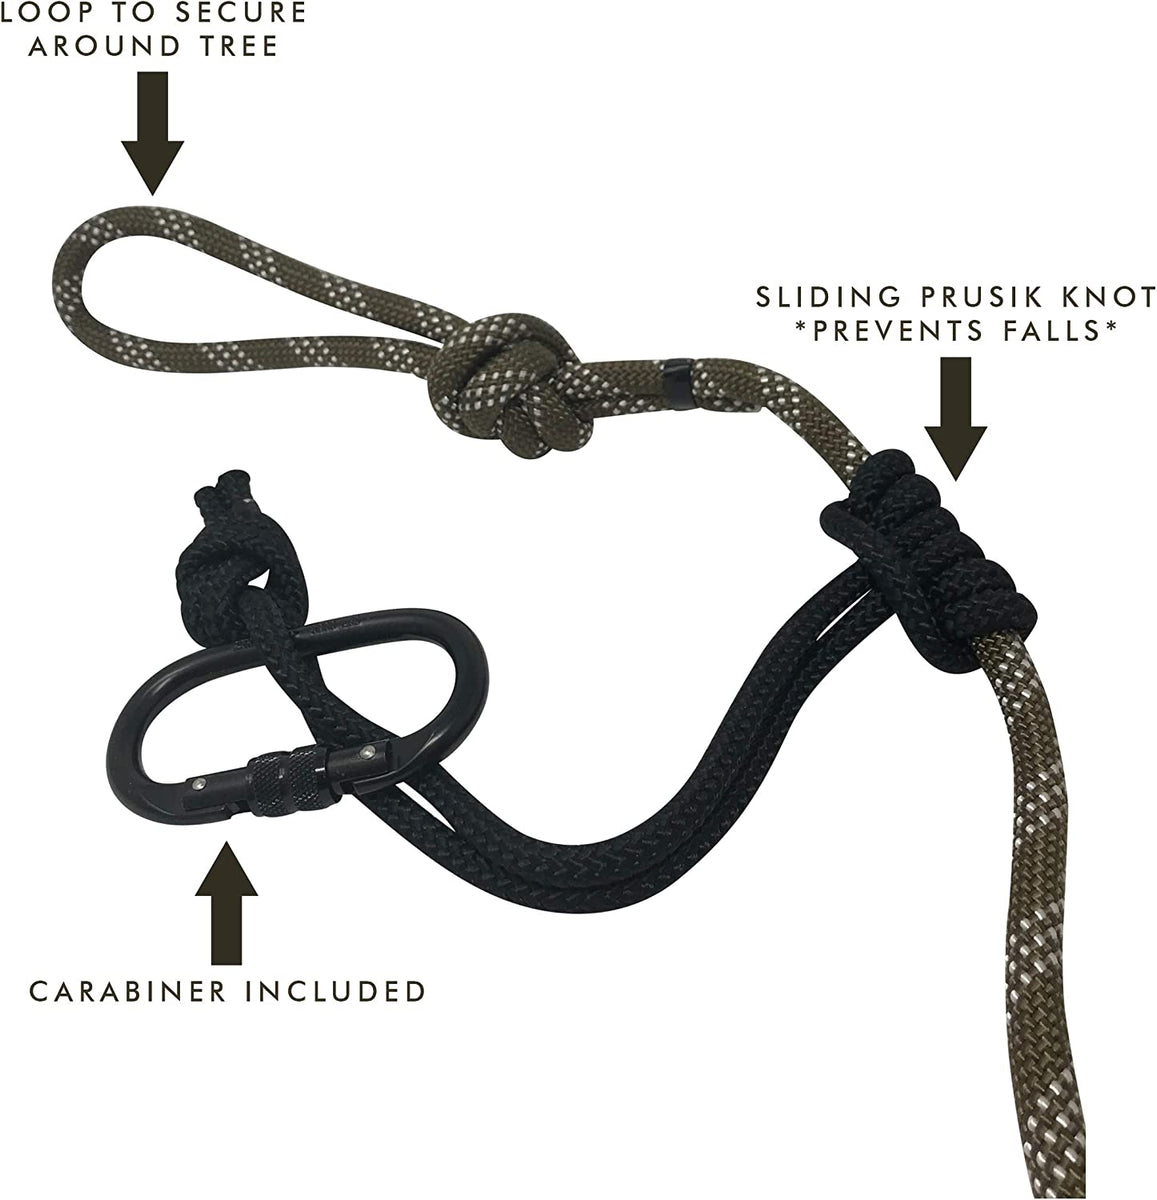 Proven Wild 8 Ft Lineman's Rope for Hunting & Treestand Safety